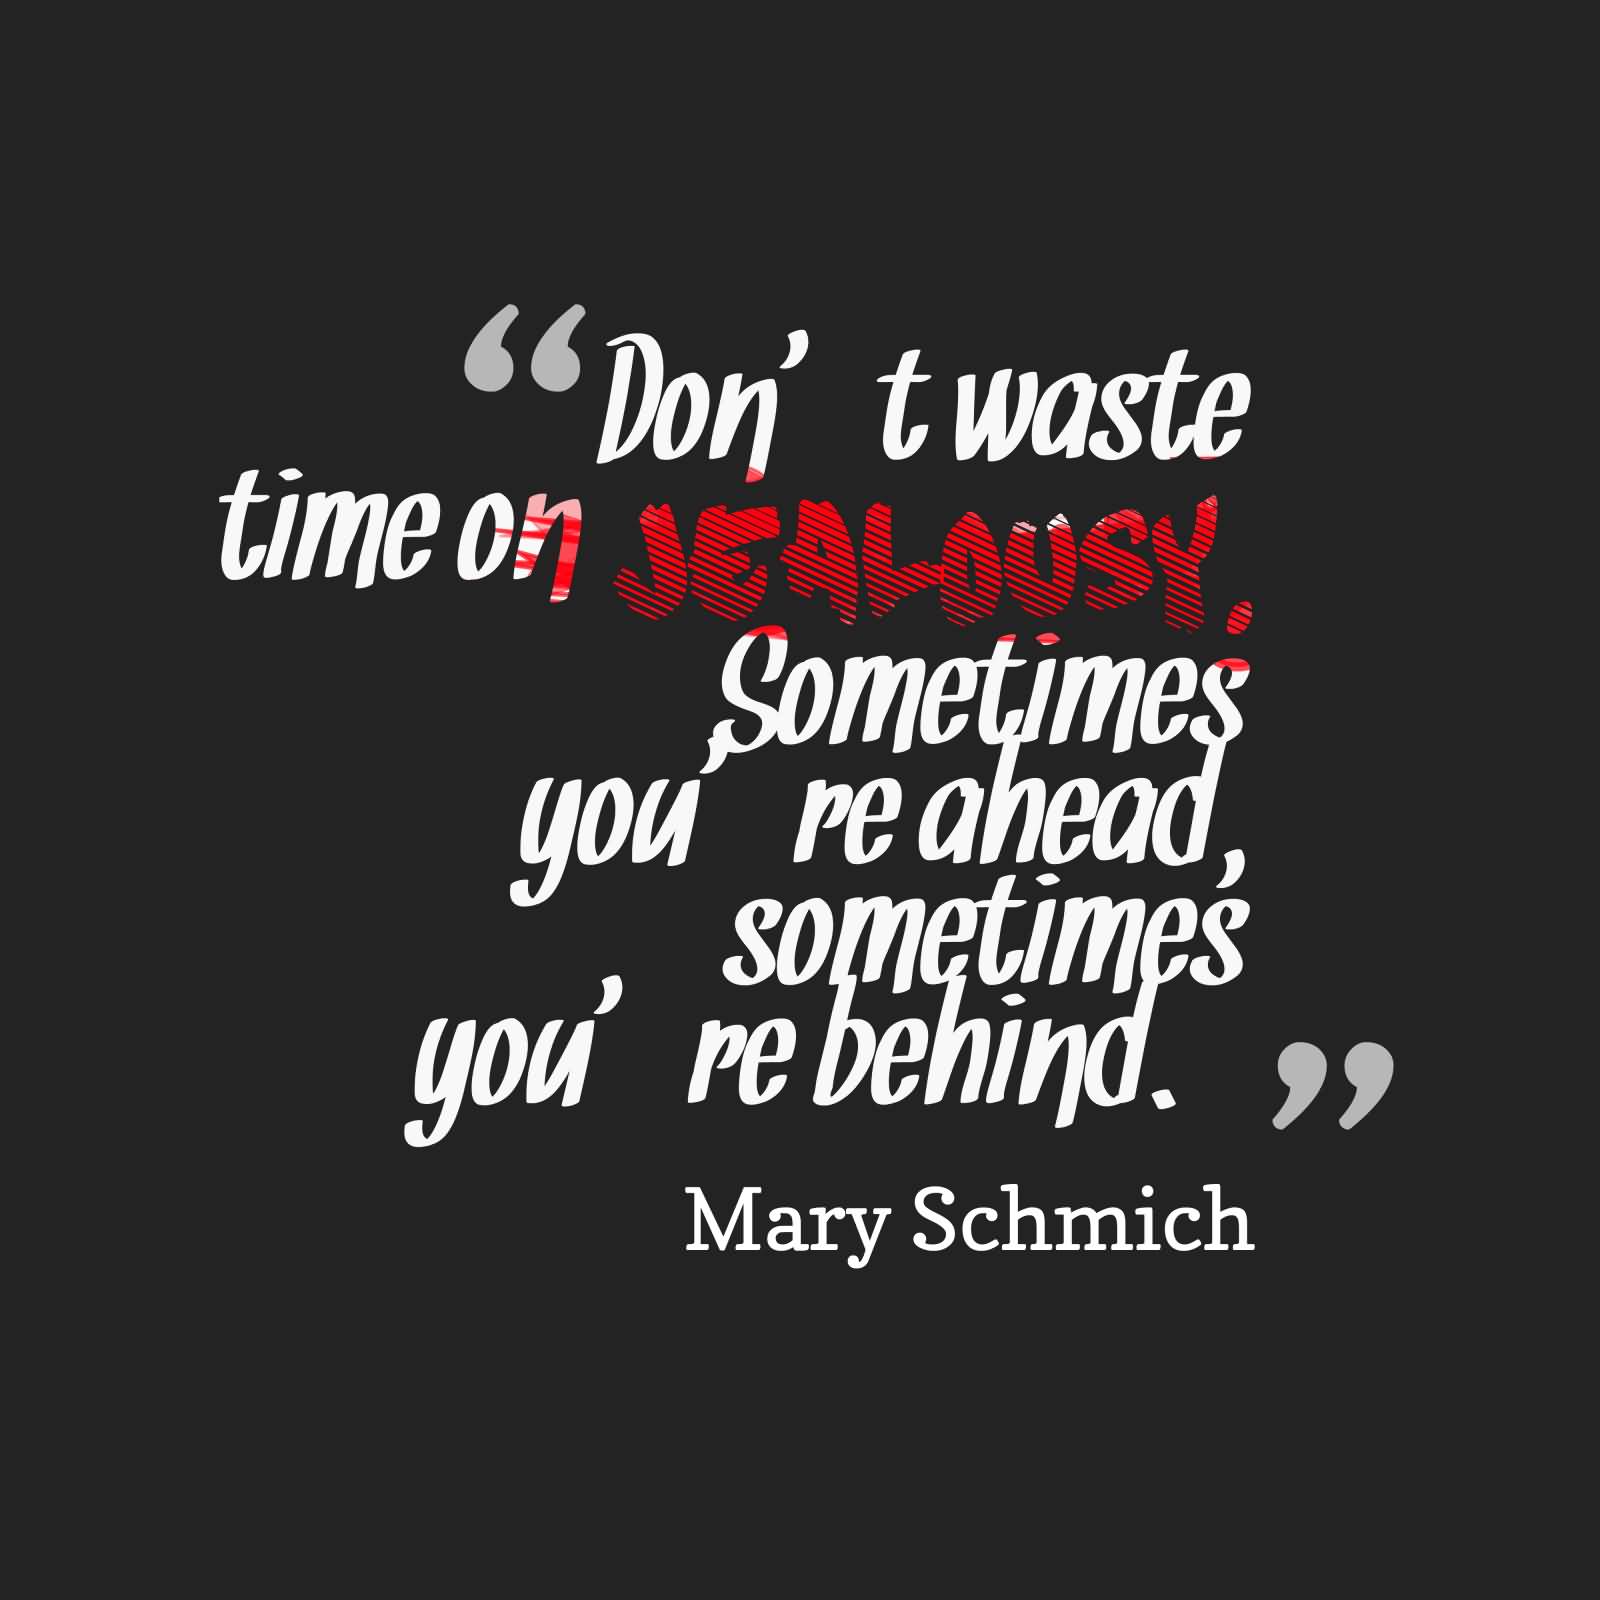 Don't waste your time on jealousy. Sometimes you're ahead, sometimes you're behind. - Mary Schmich